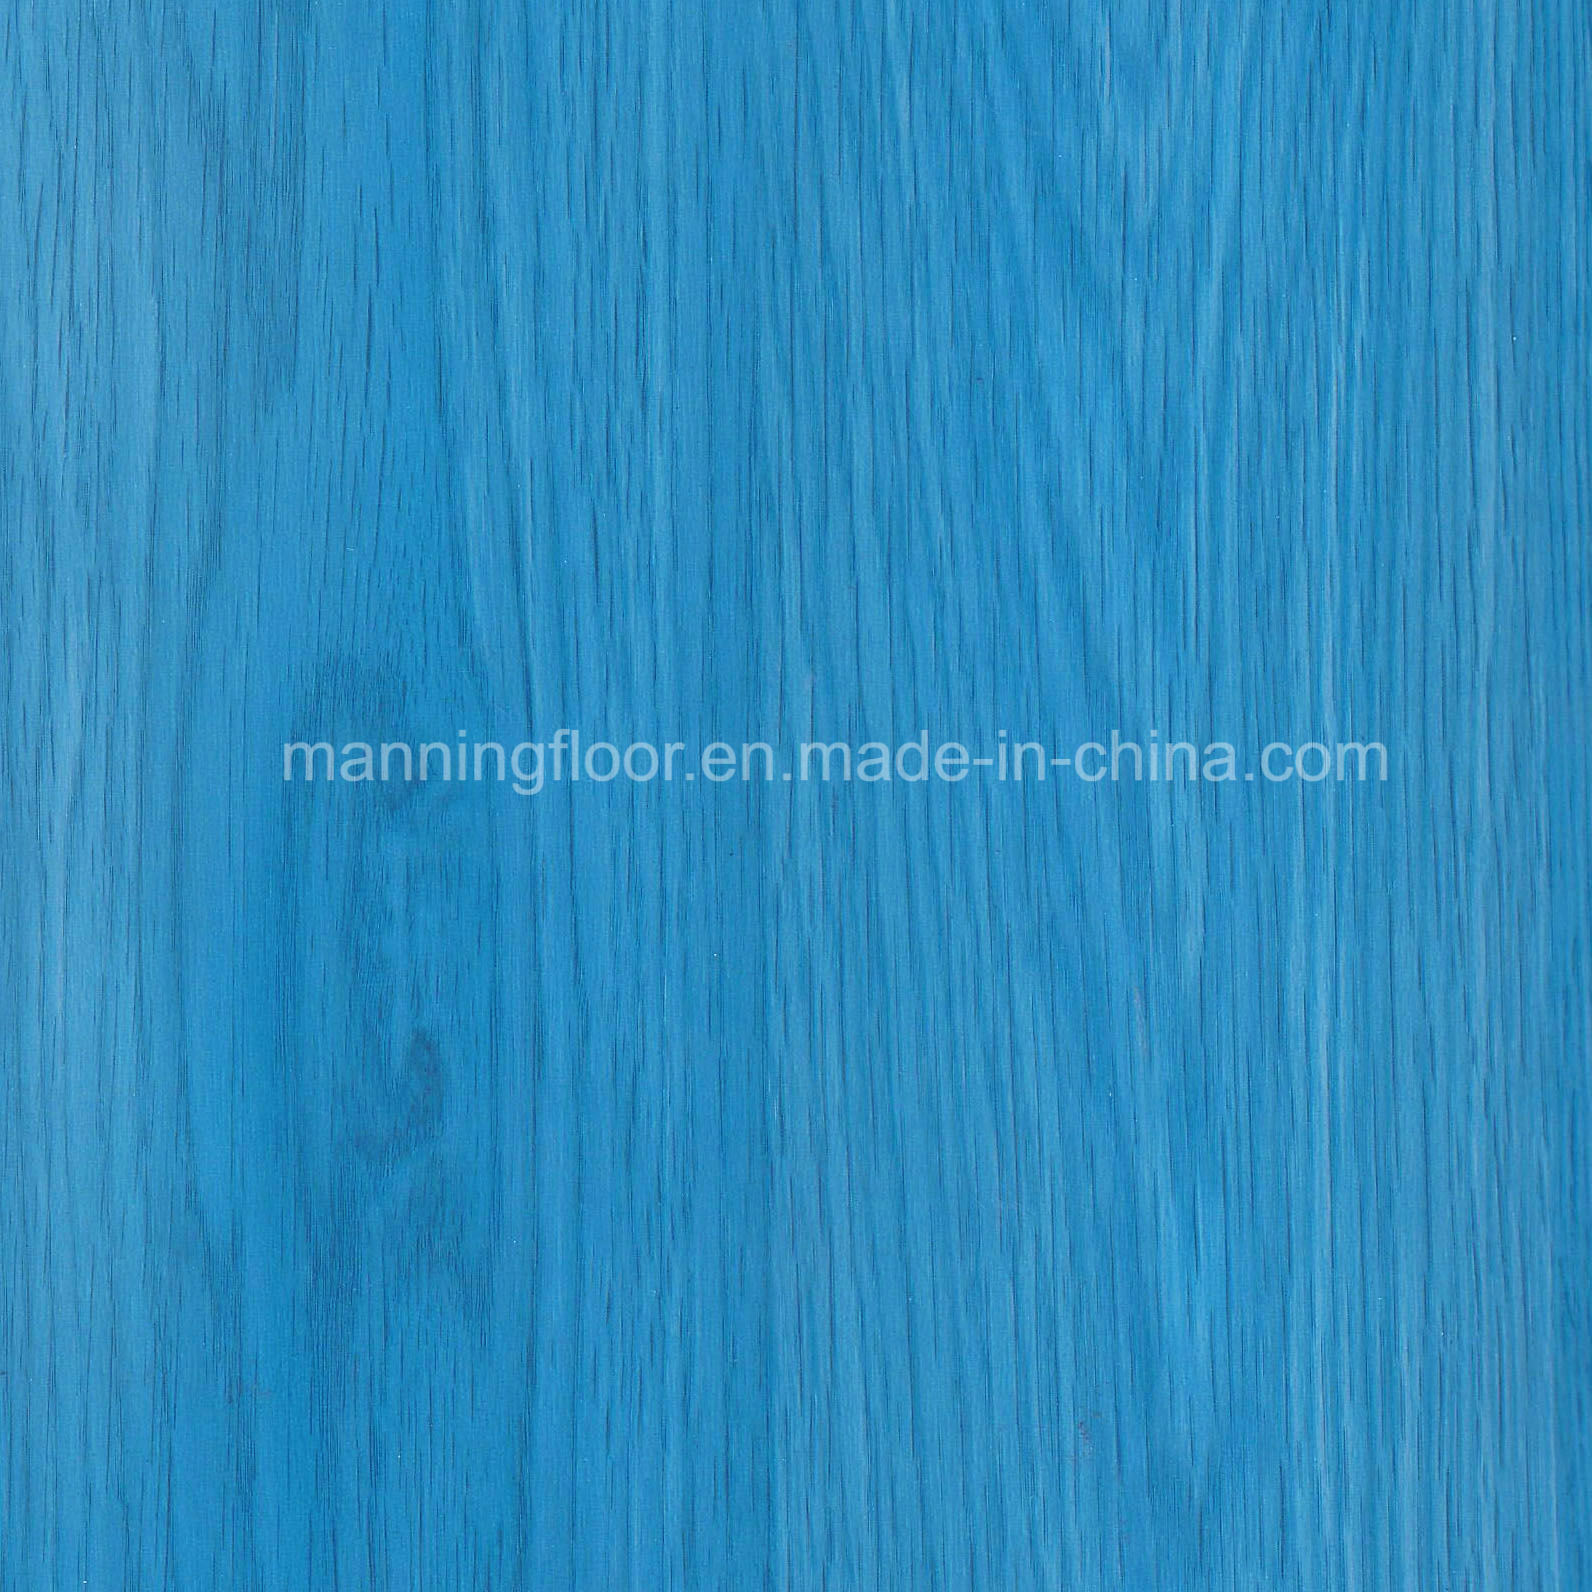 PVC Sports Flooring for Indoor Basketball Wood Pattern-4.5mm Thick Hj6813